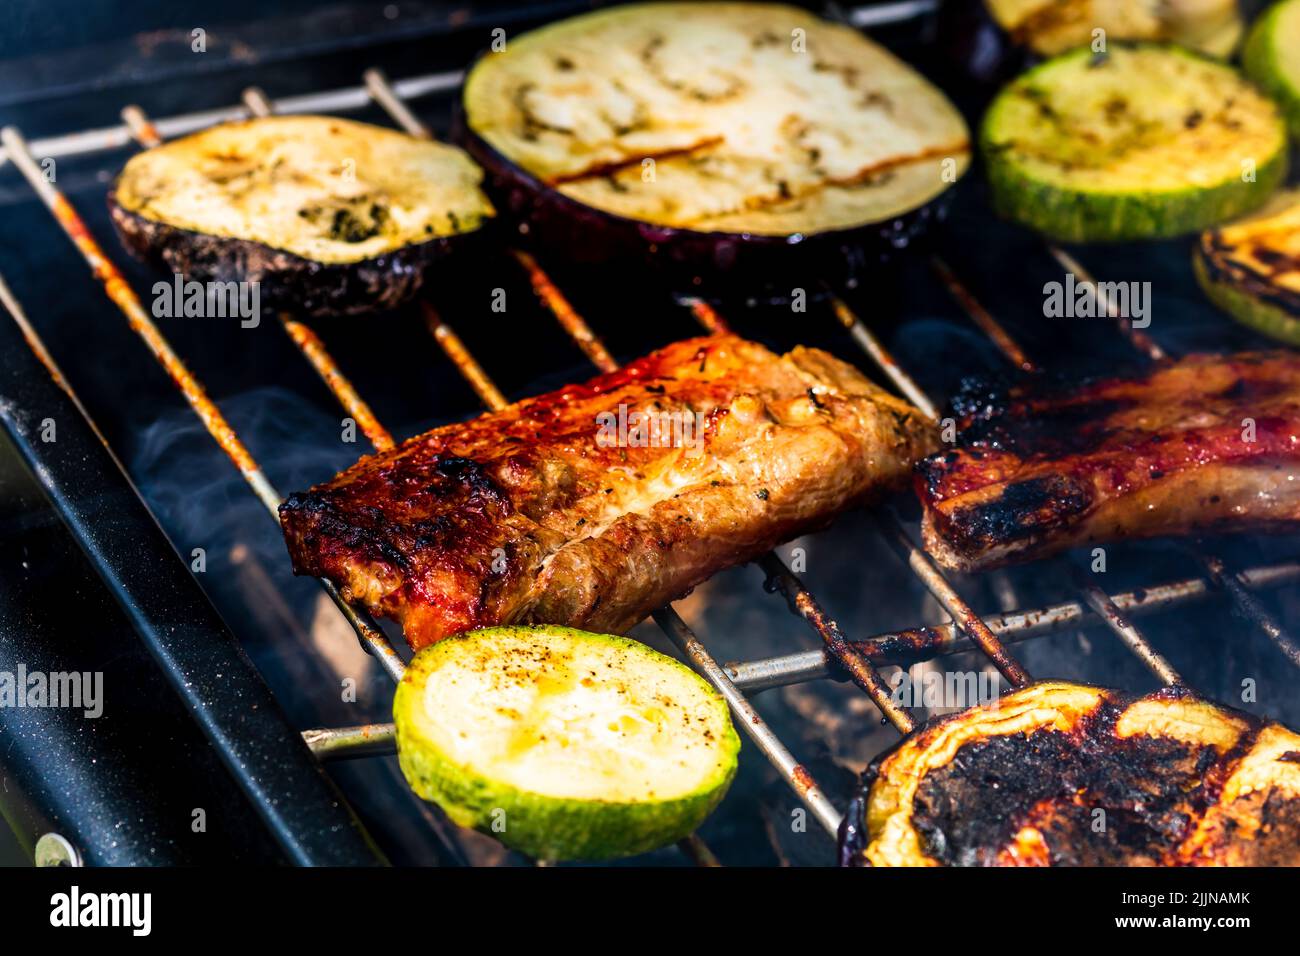 Grilling meat rolls called mici or mititei with vegetables on char barbecue Stock Photo